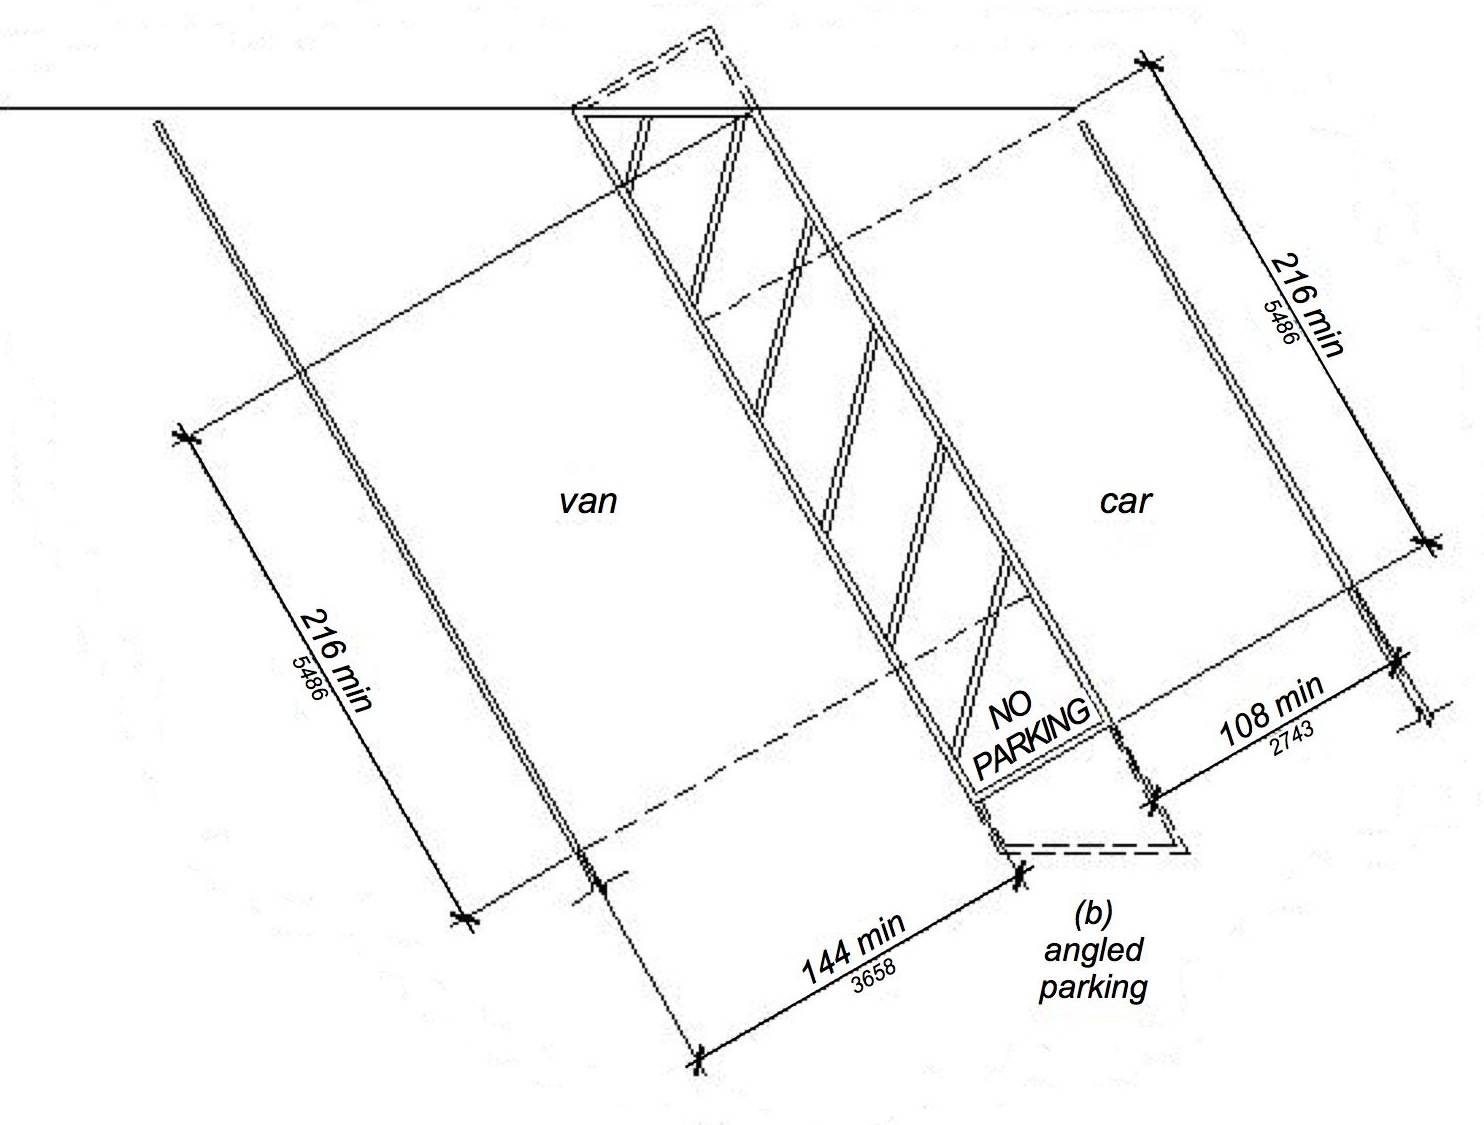 Plan drawing of a diagonal/angled van and car accessible space with a shared access aisle in between the two spaces. The access aisle is as long as the spaces it serves. The van accessible space is shown at least 144" minimum wide and the car accessible space is shown as 108" minimum wide and both spaces are 216" minimum long. The access aisle is shown with cross hatching and "NO PARKING".
